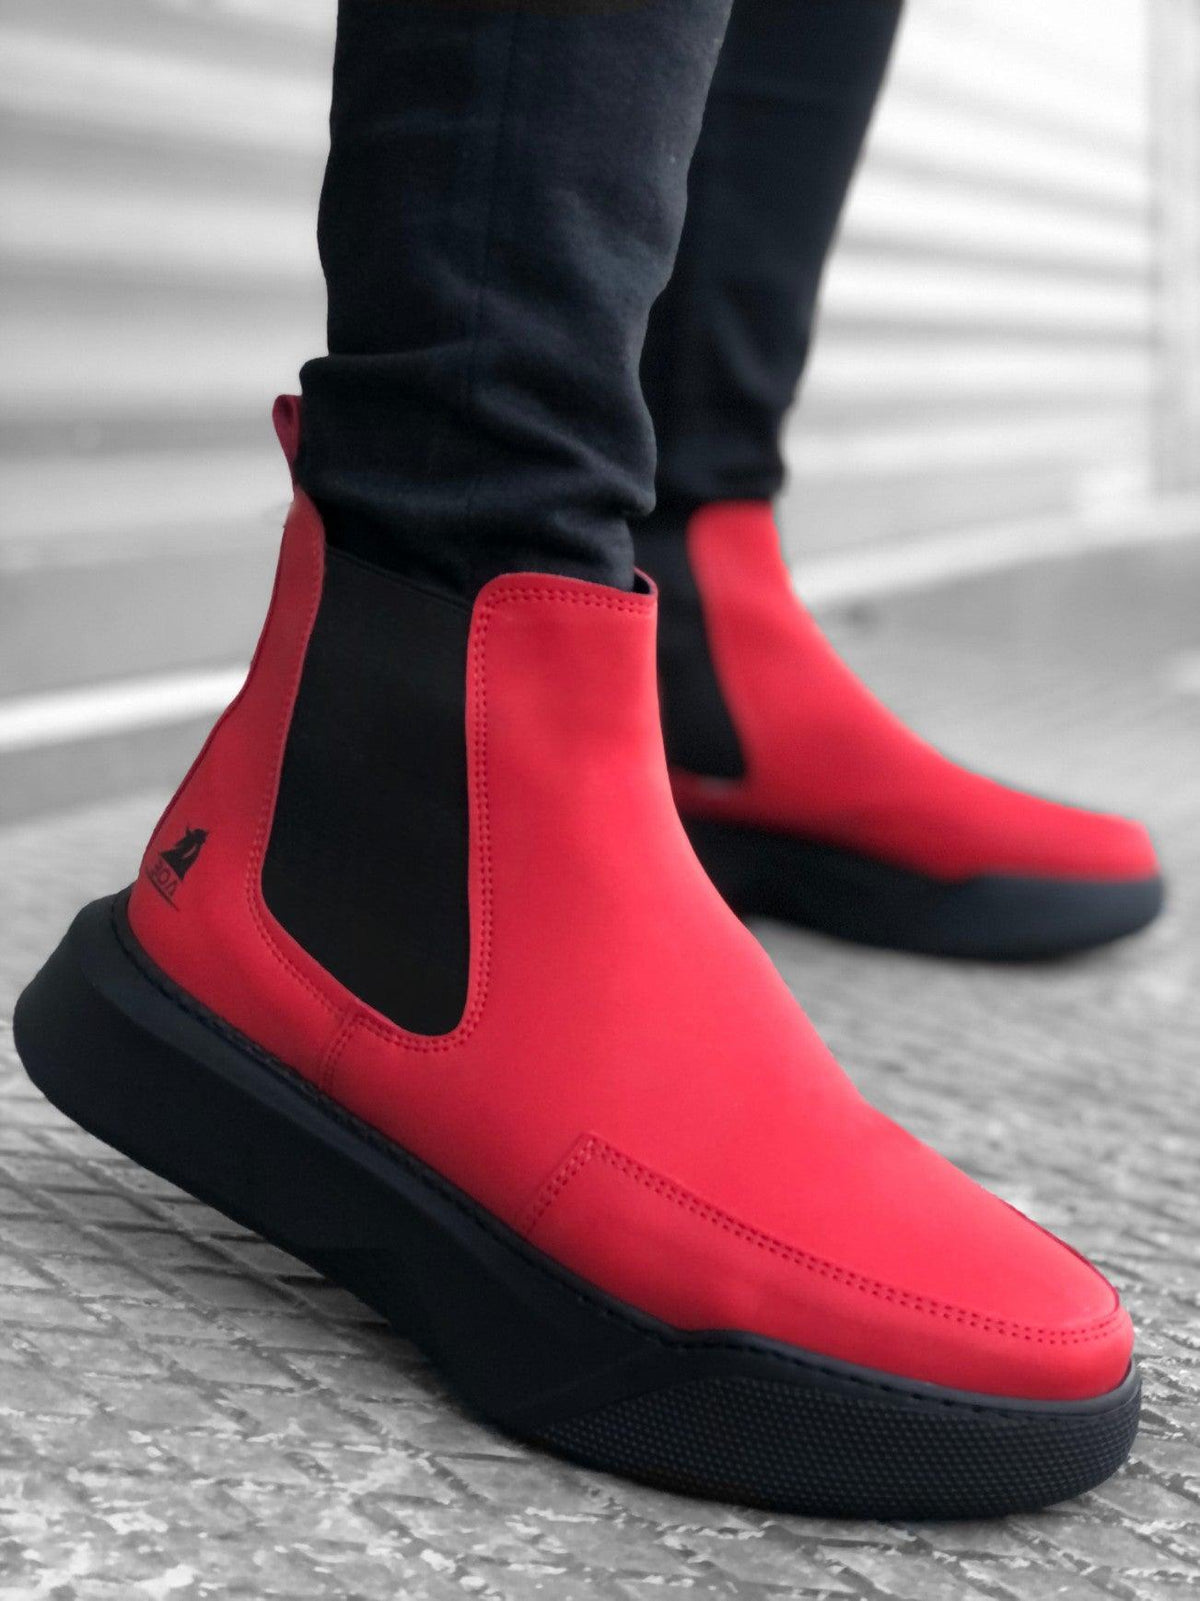 BA0150 Lace-Up Banded Men's High Sole Red Sport Boot - STREET MODE ™